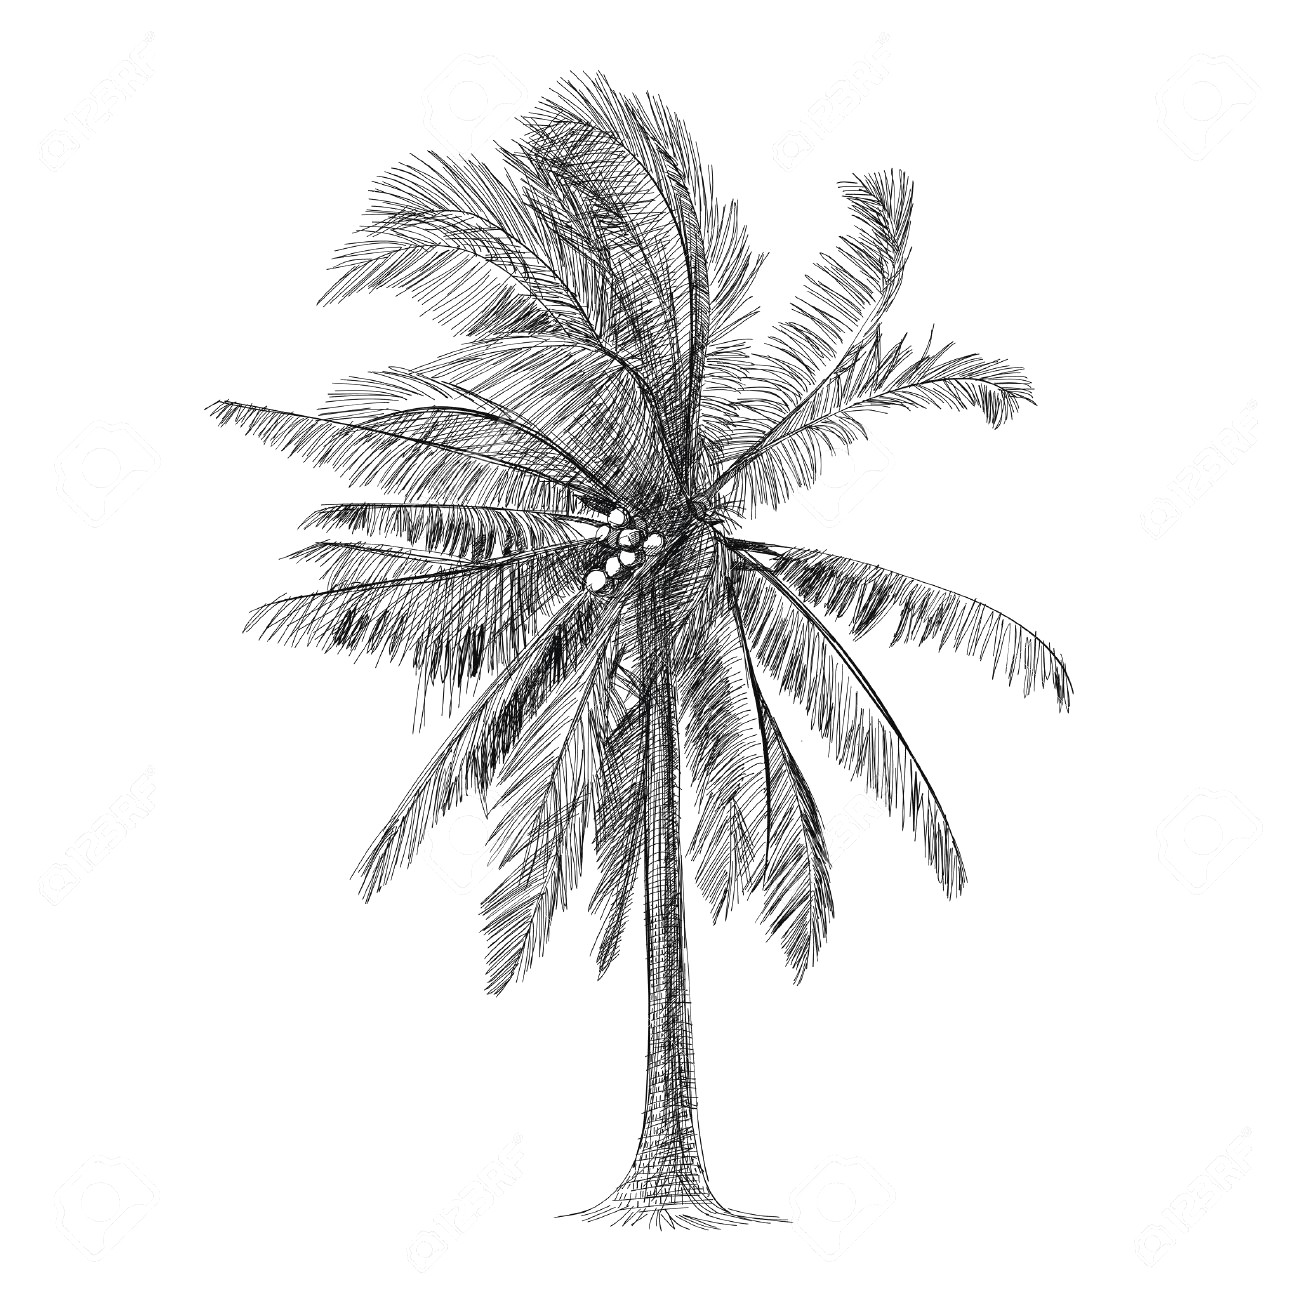 Pencil Drawing Of Coconut Tree